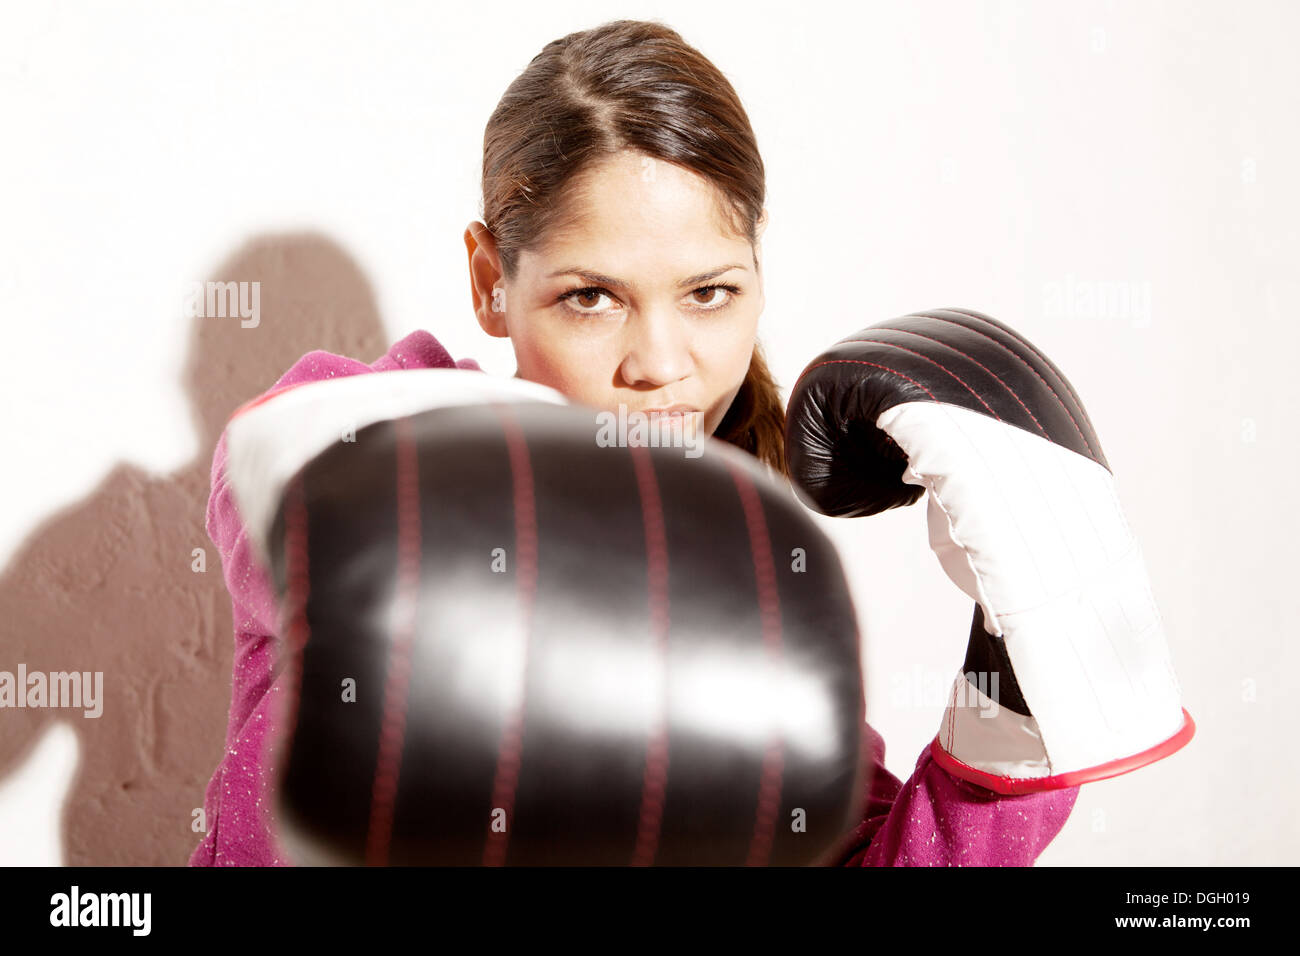 Young woman wearing boxing gloves Stock Photo